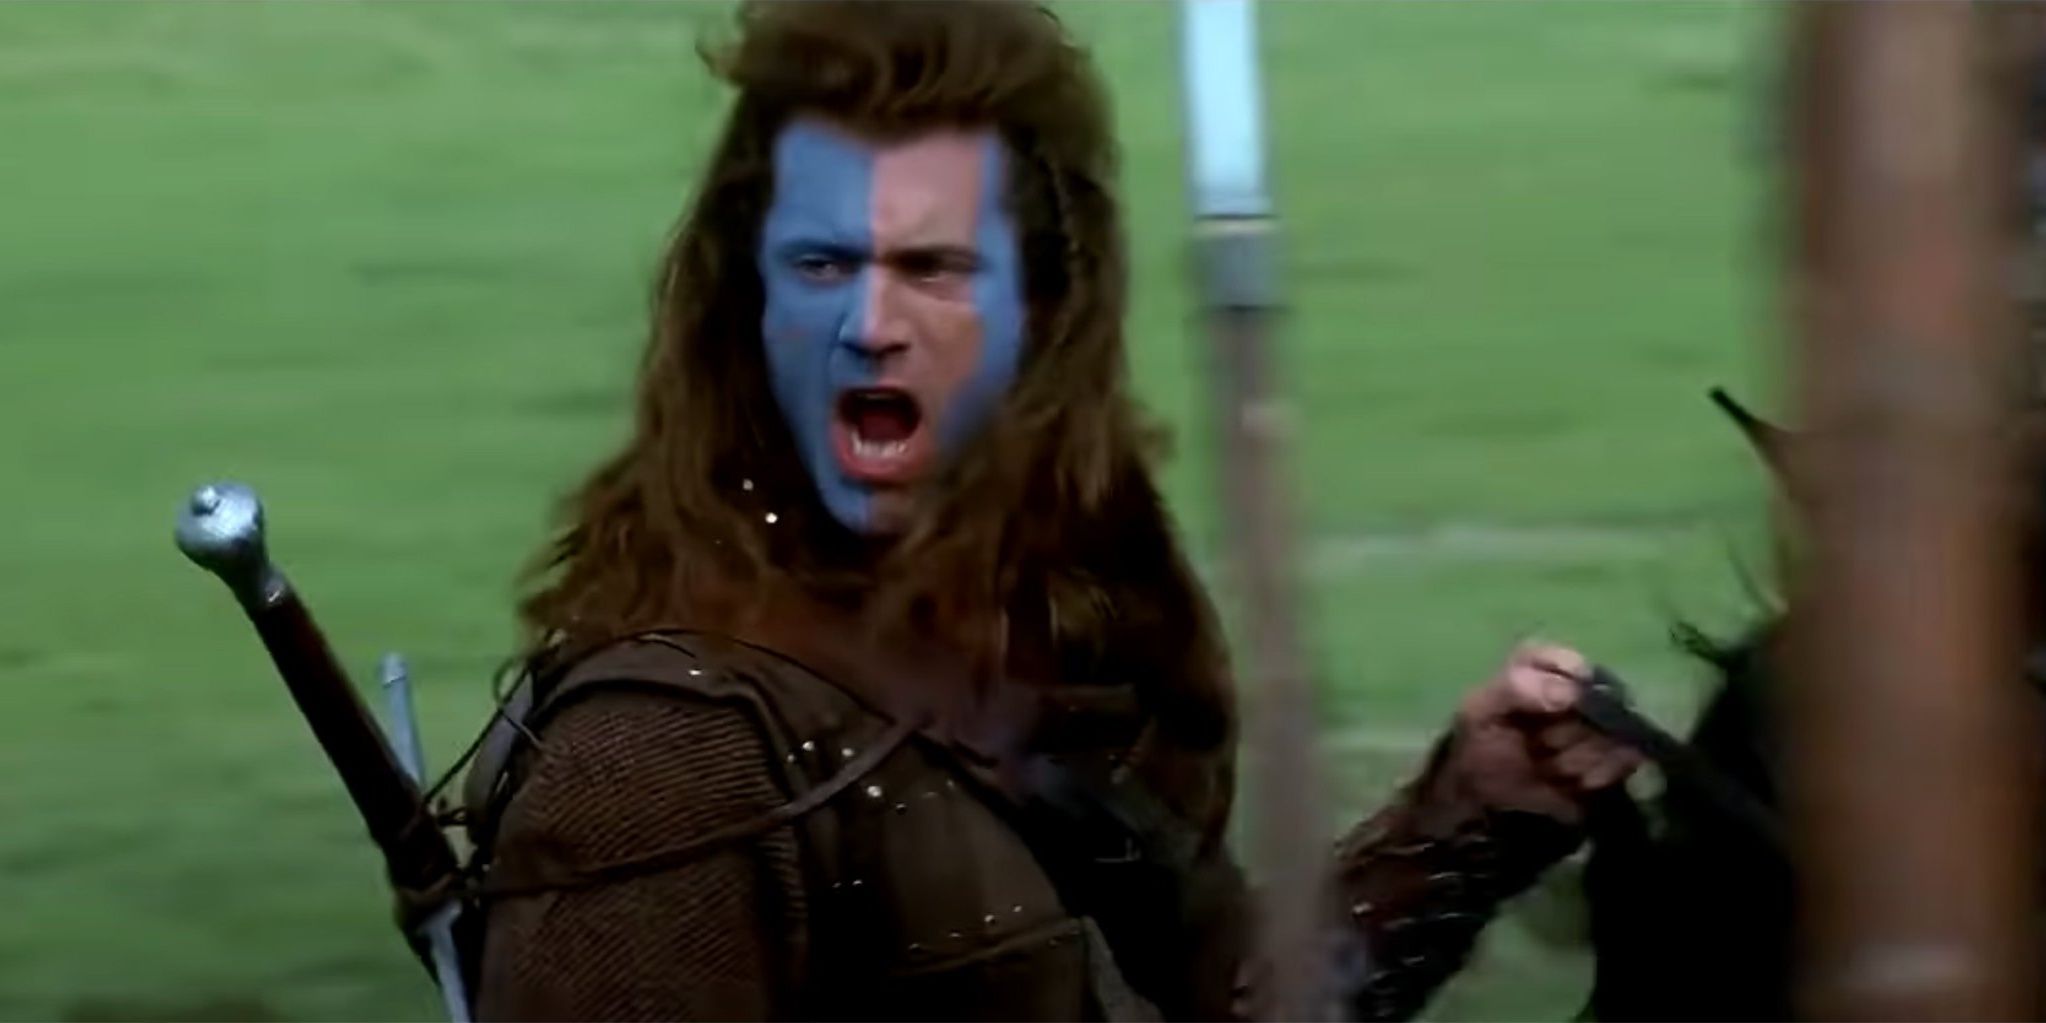 mel gibson as william wallace